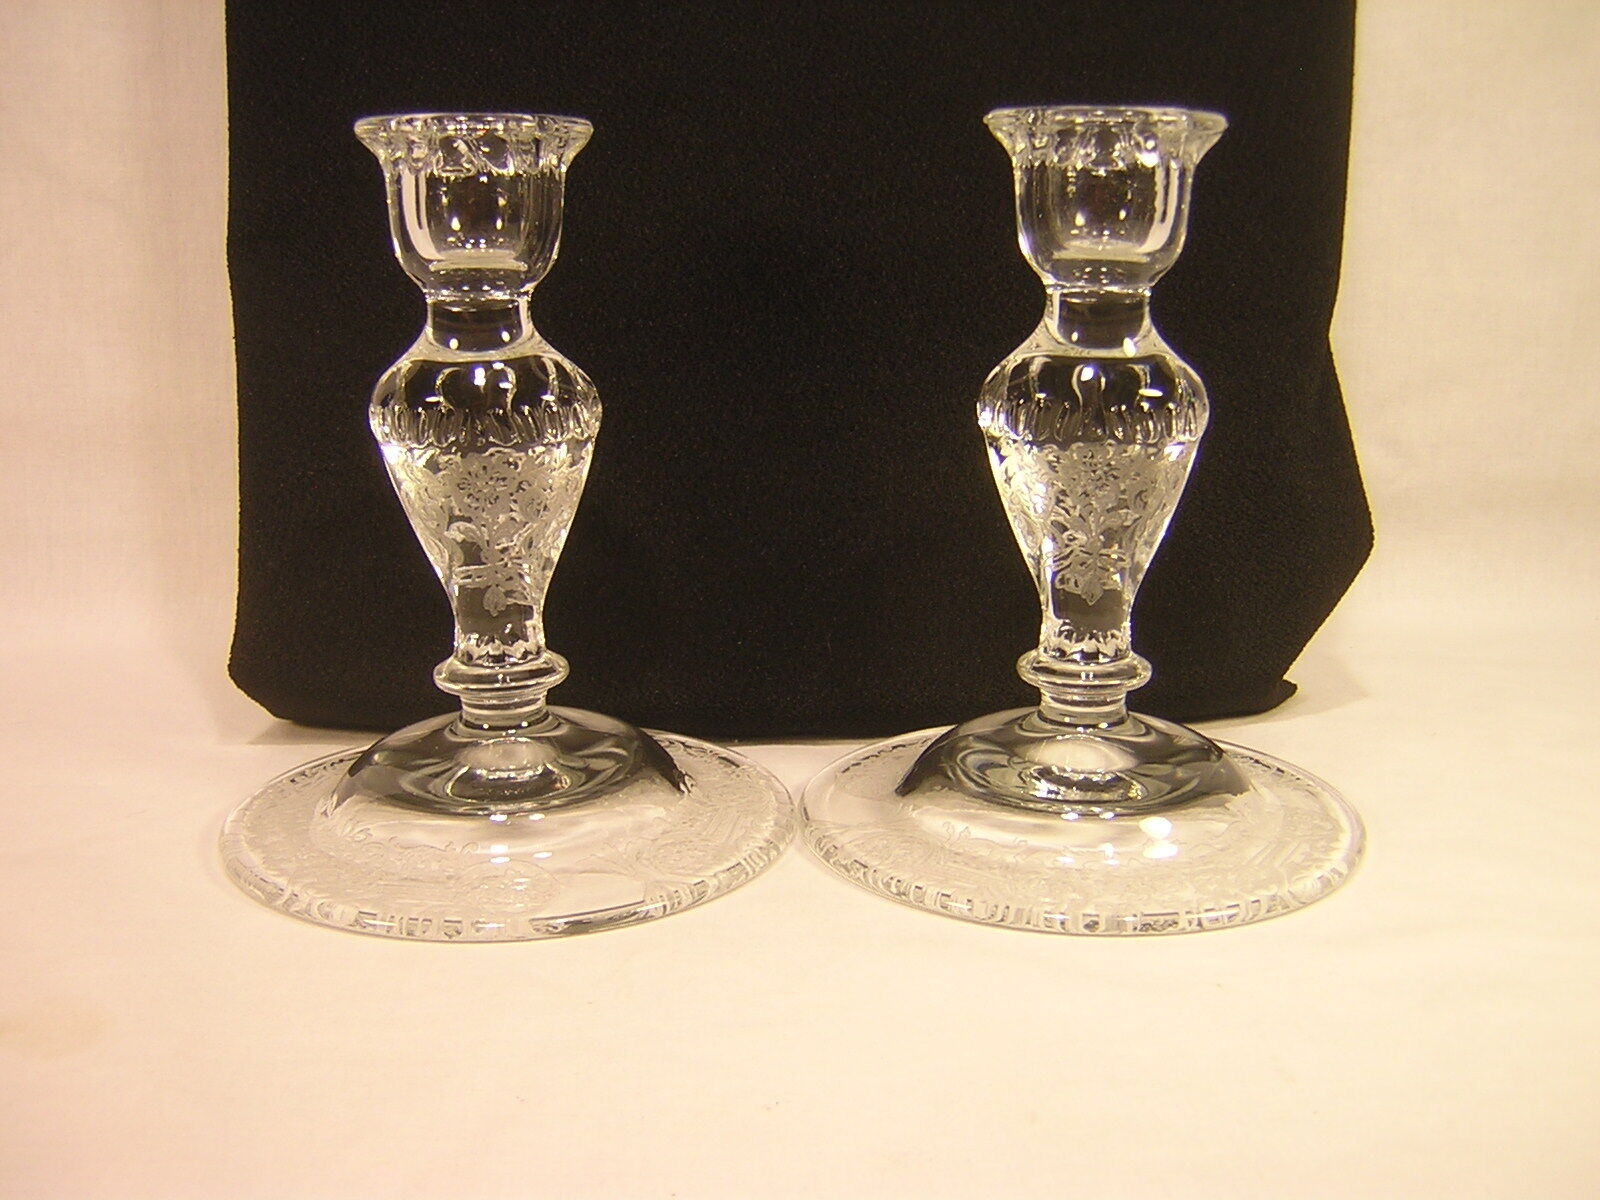 Paden City IRWIN Crystal Etched Candlesticks ~ Pair